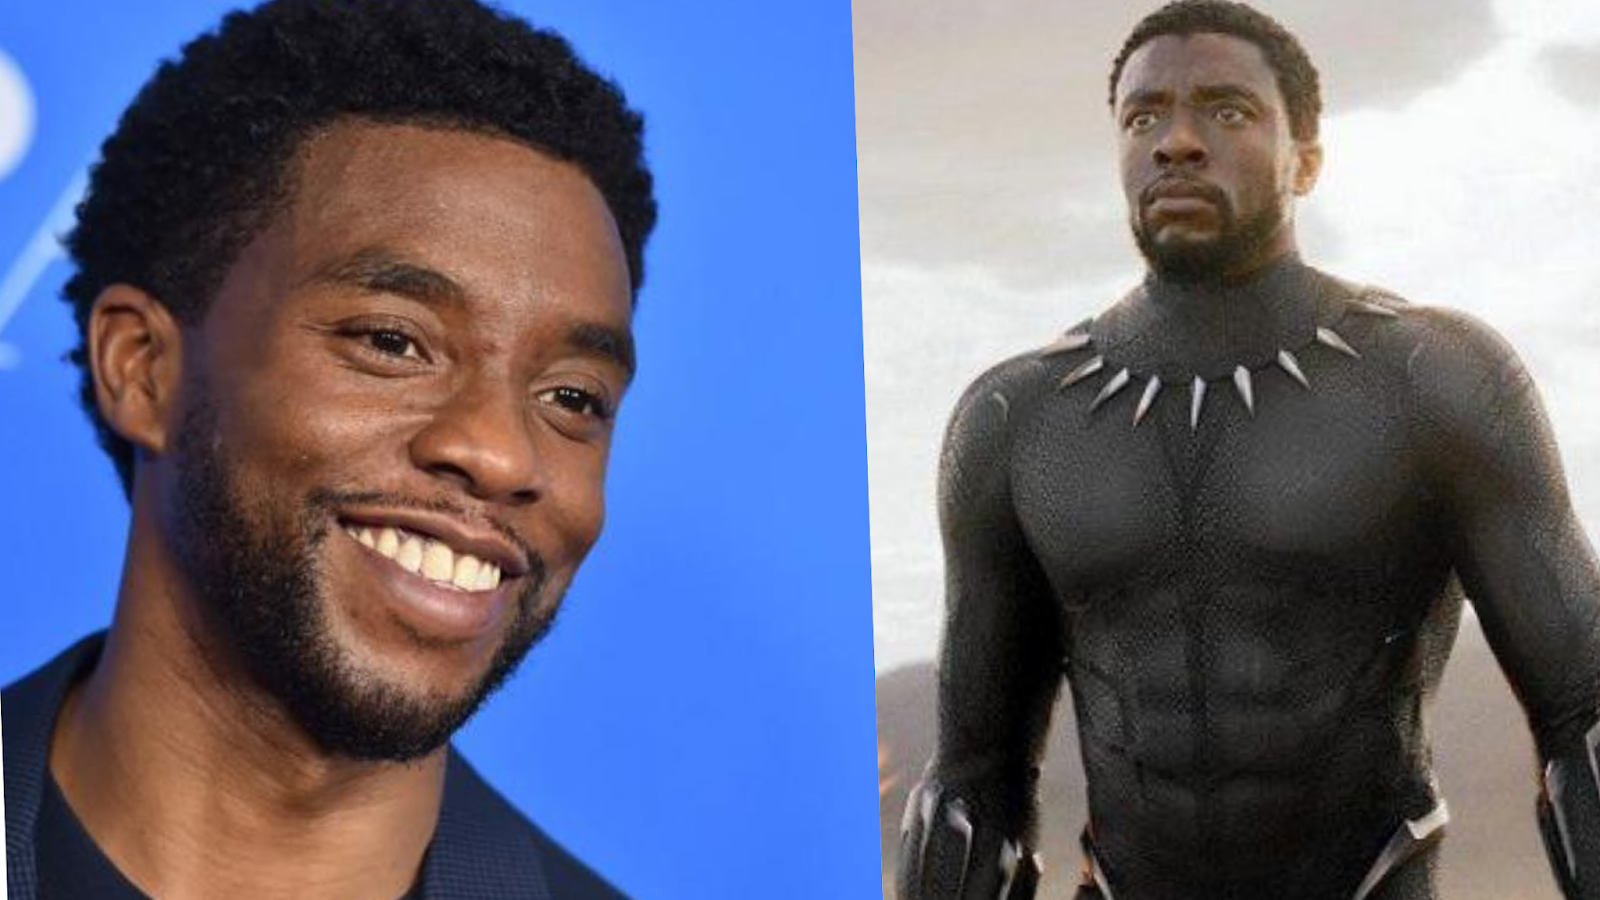 Black Panther star Chadwick Boseman dies due to cancer at 43